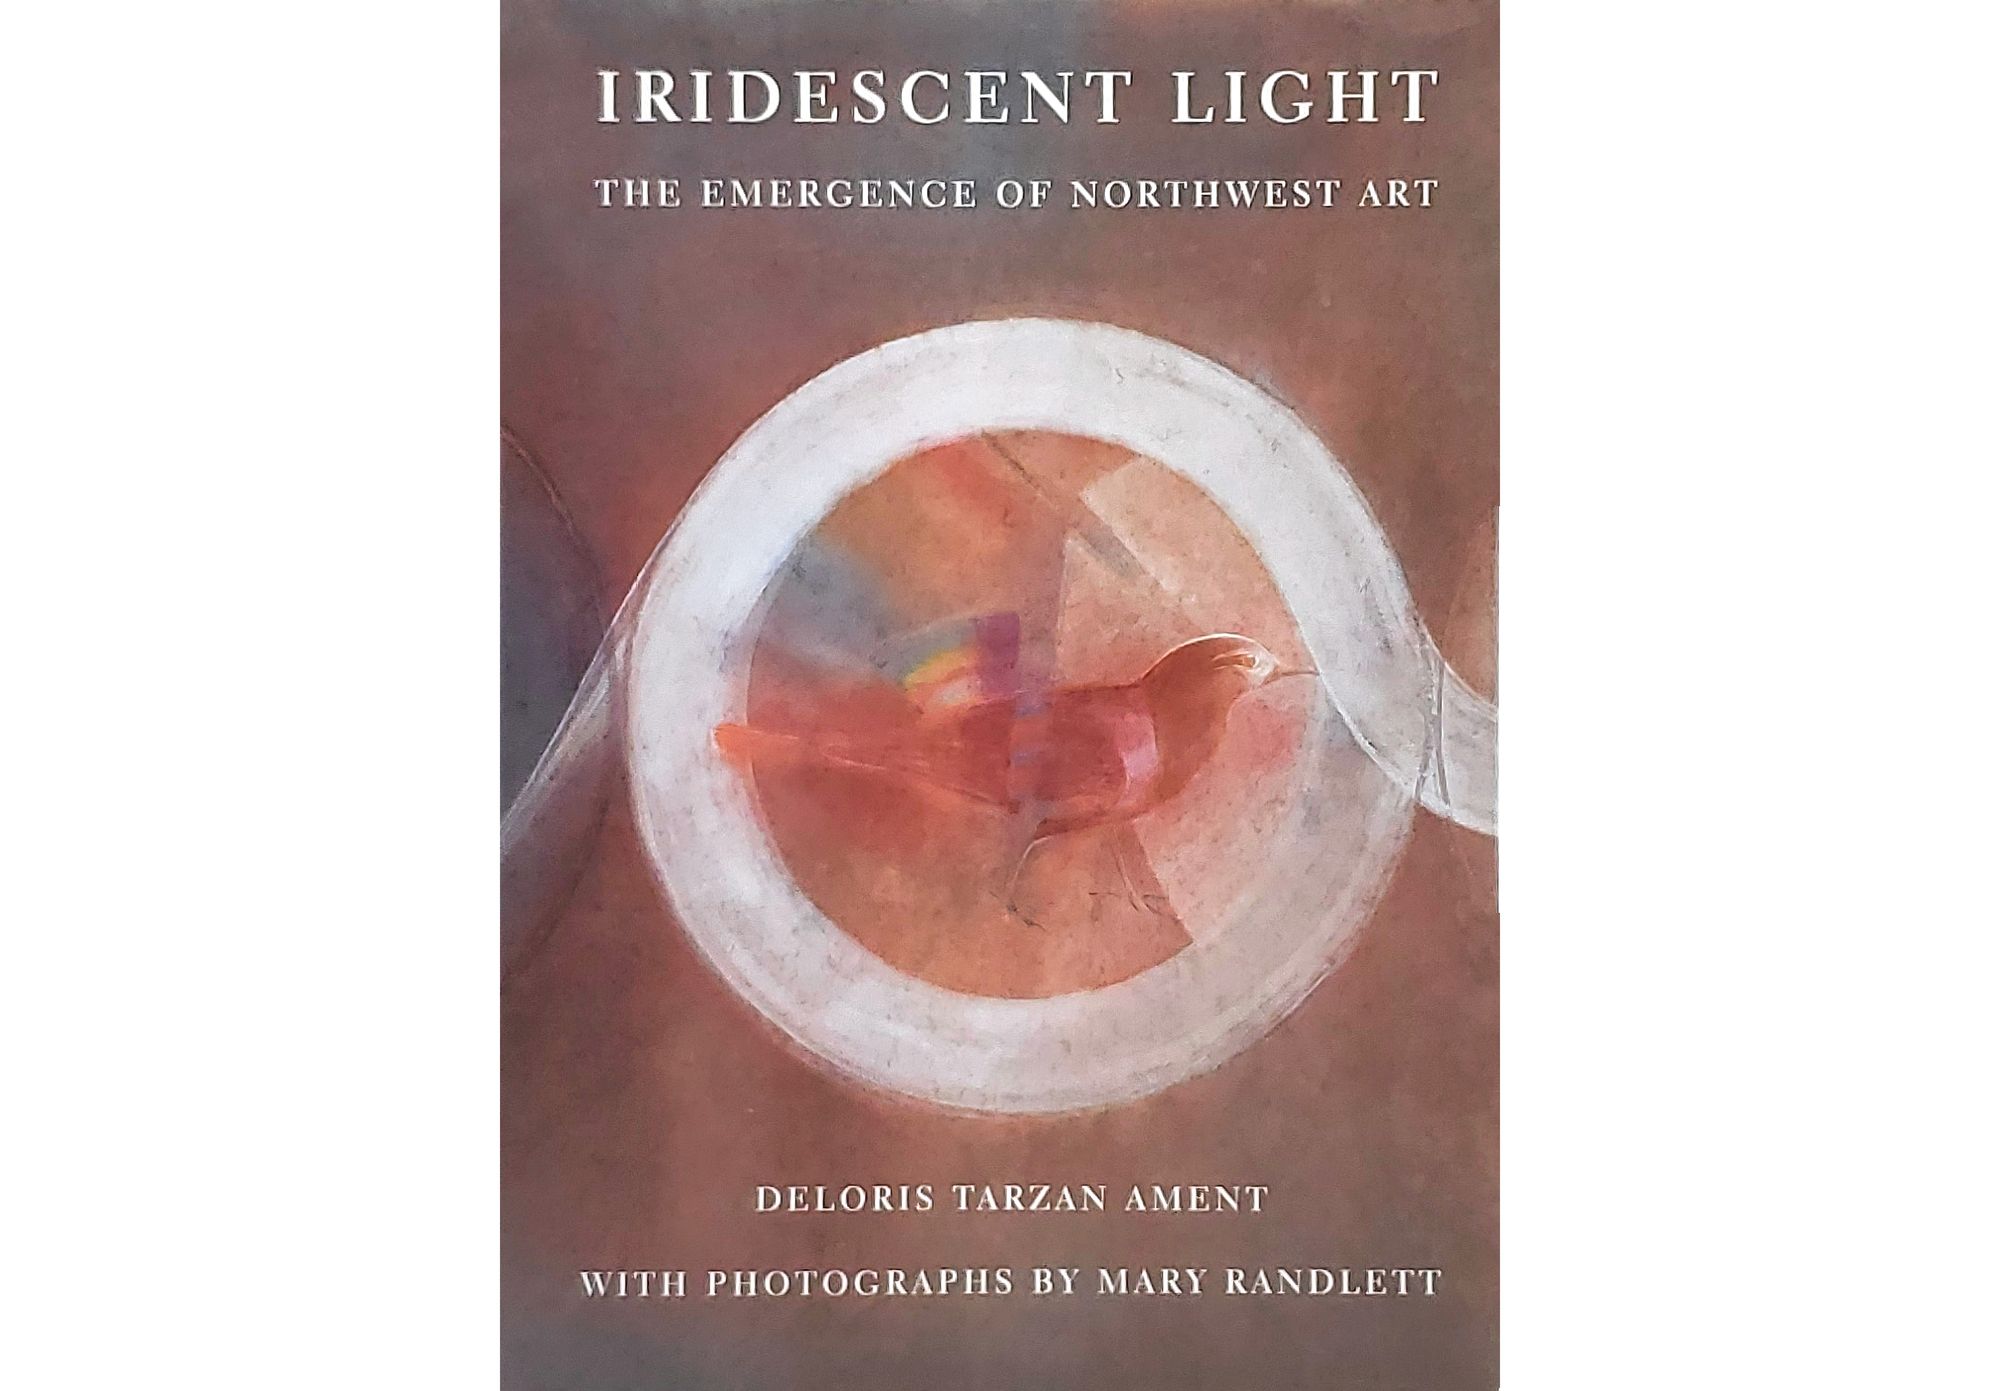 Image of book cover of the Iridescent Light